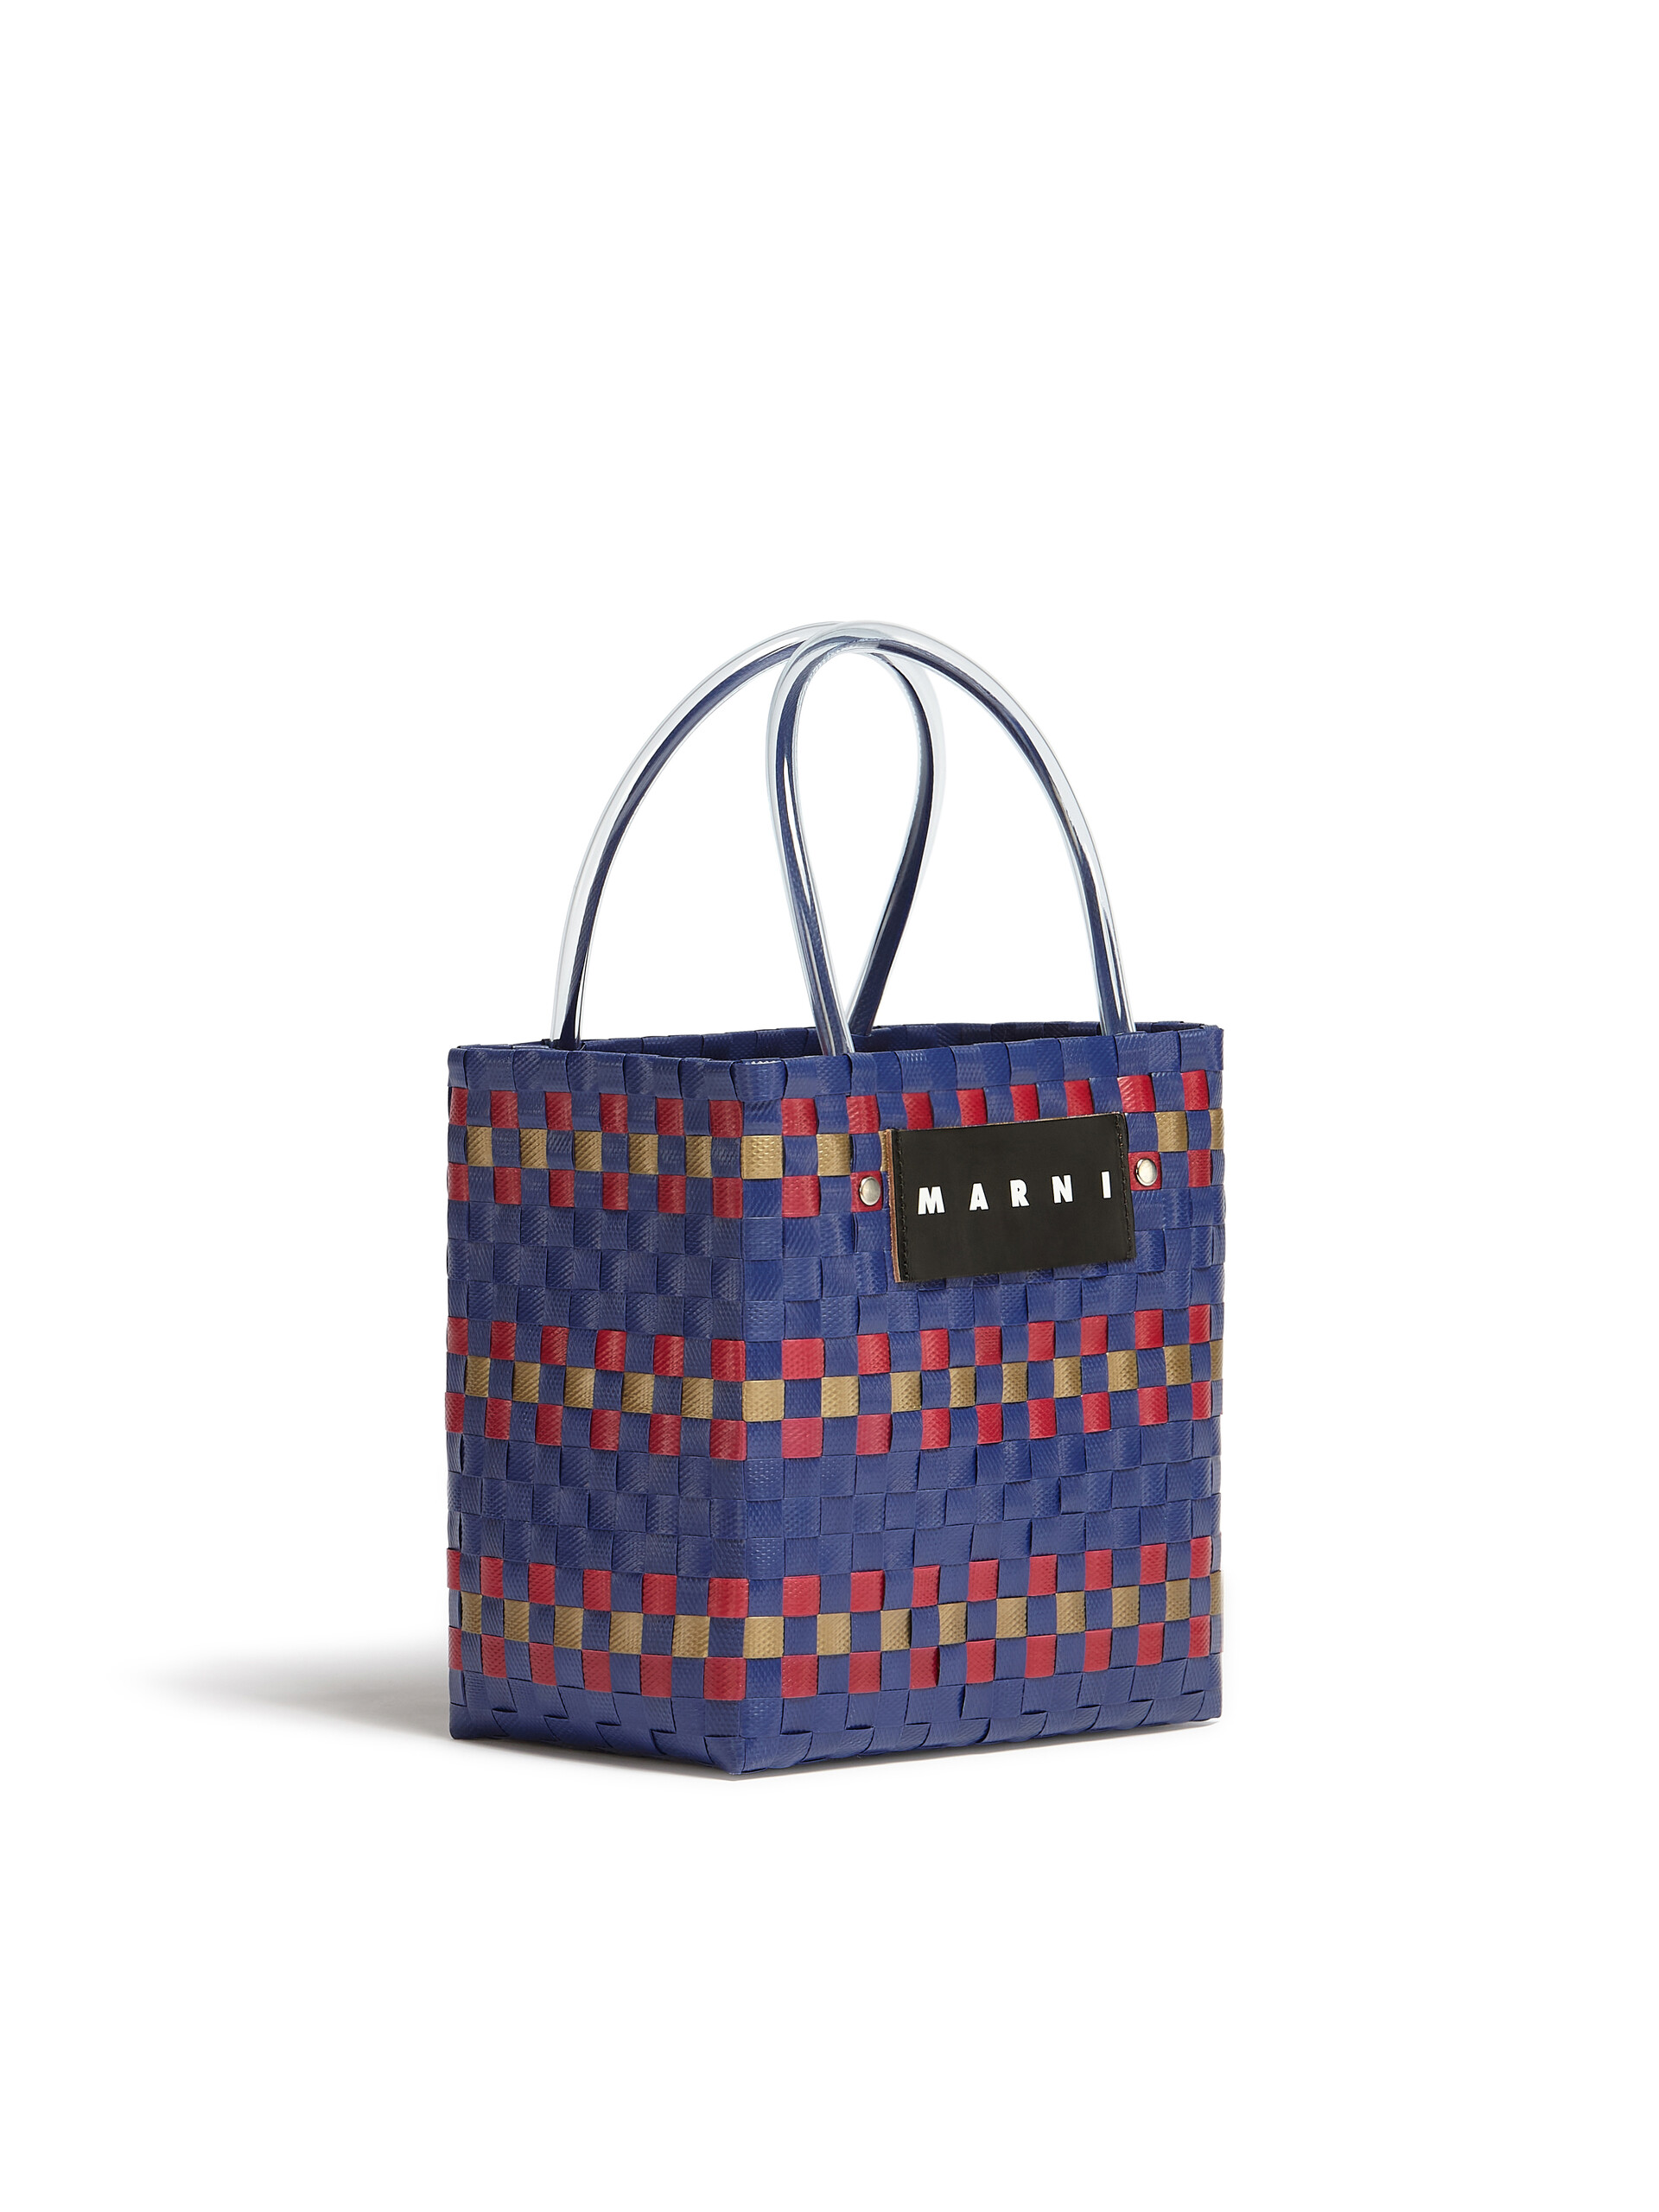 MARNI MARKET BASKET bag in blue woven material - Shopping Bags - Image 2